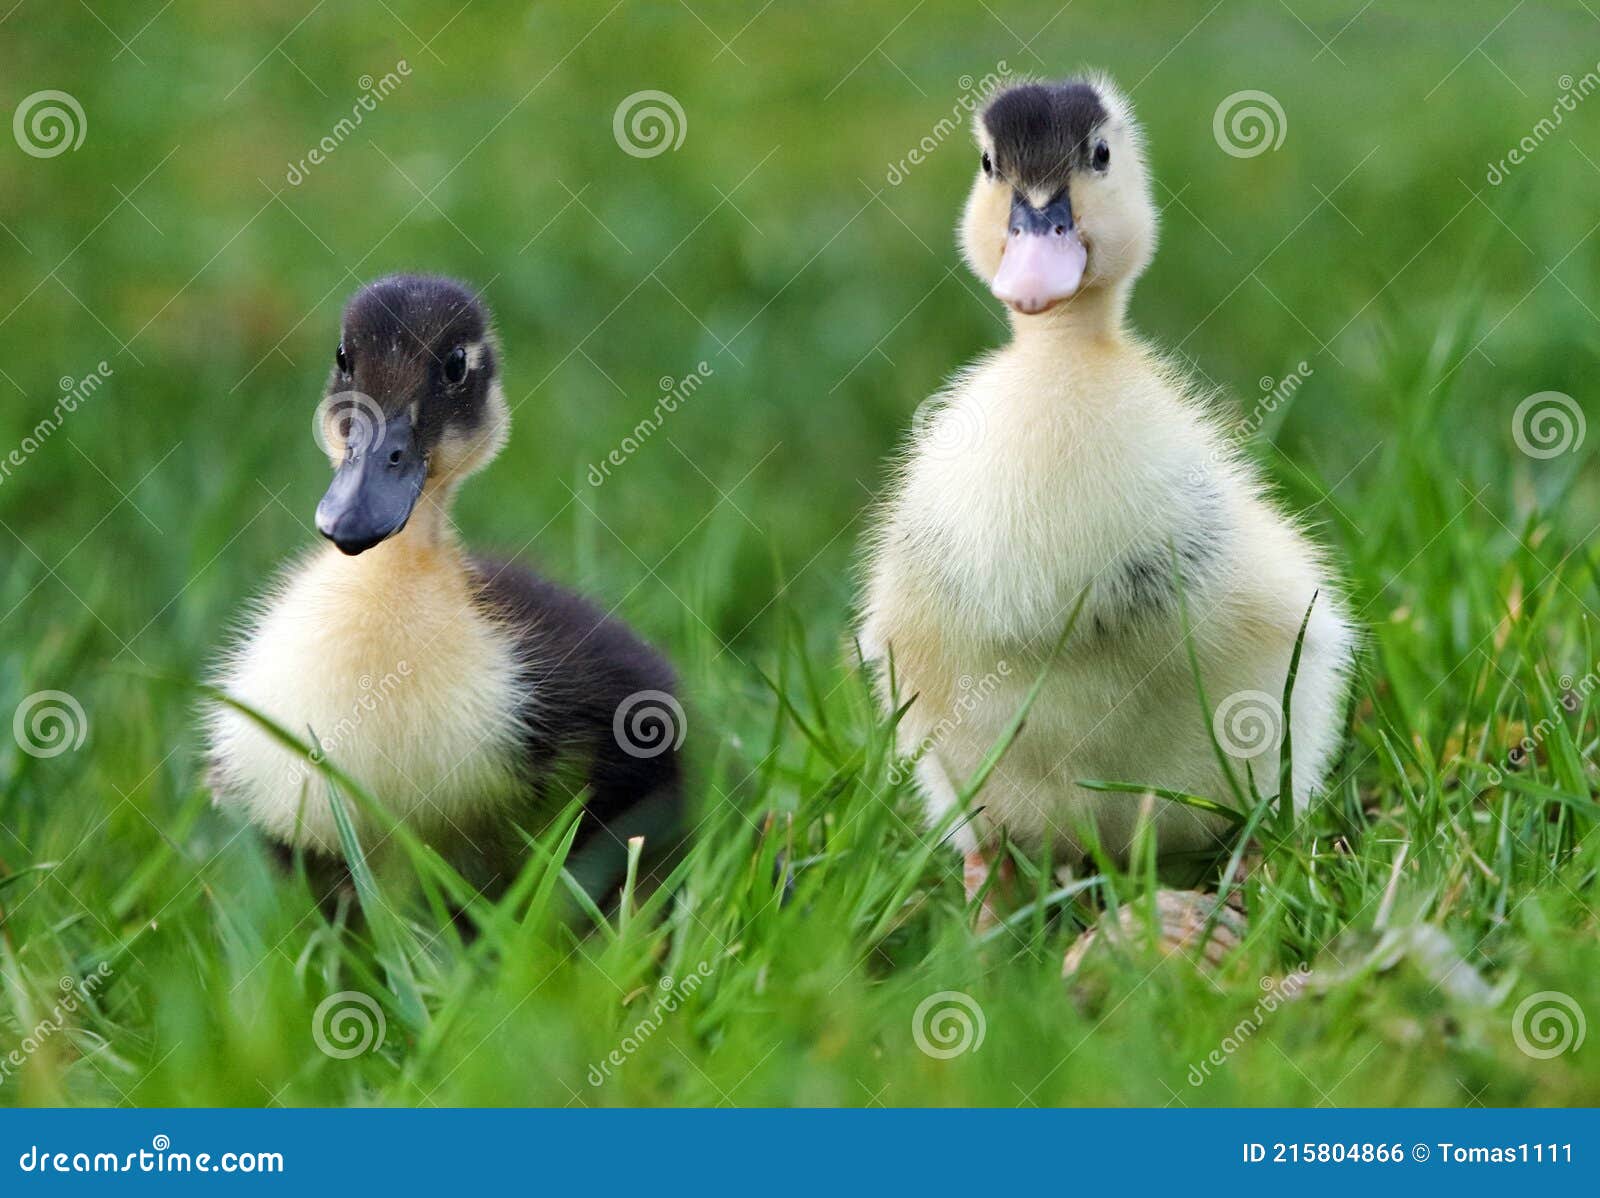 baby duck in greem grass, nature